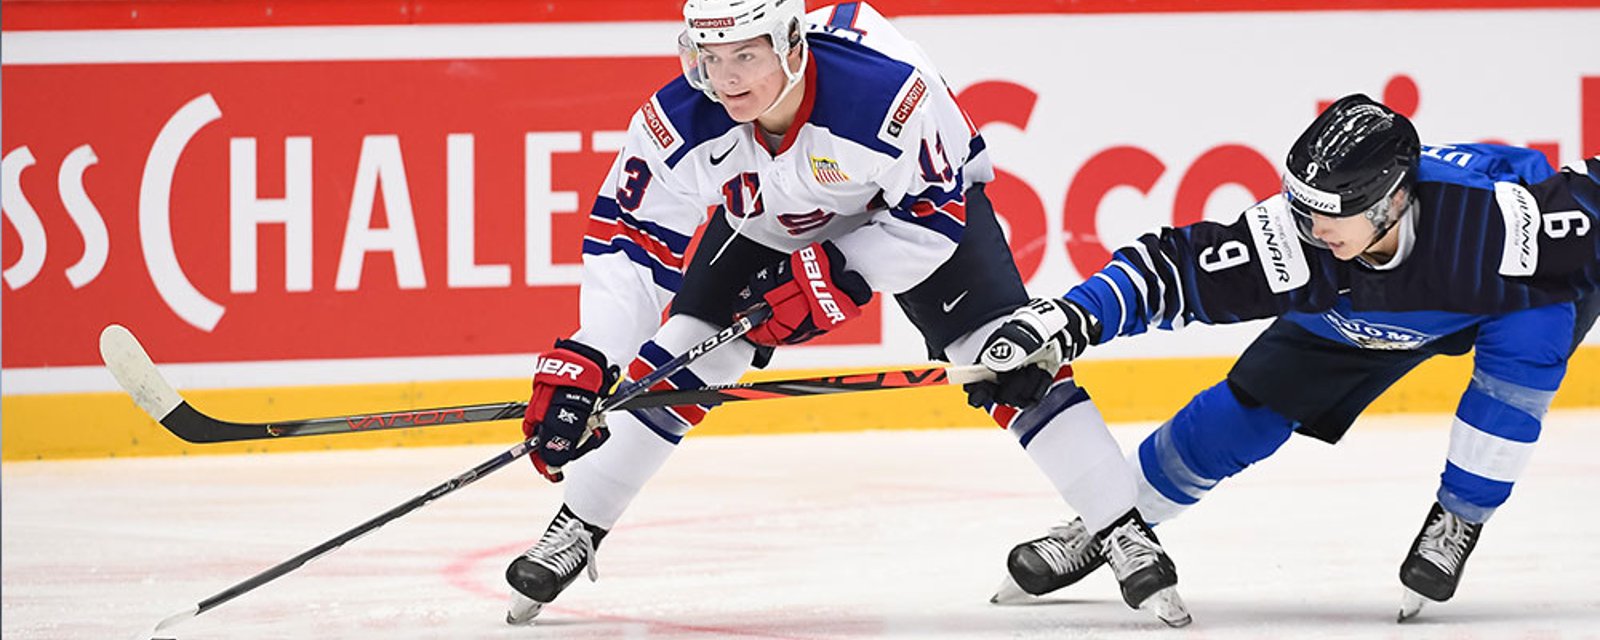 Tempers flare and blood spills as USA loses to Finland in elimination game at World Junior Championships